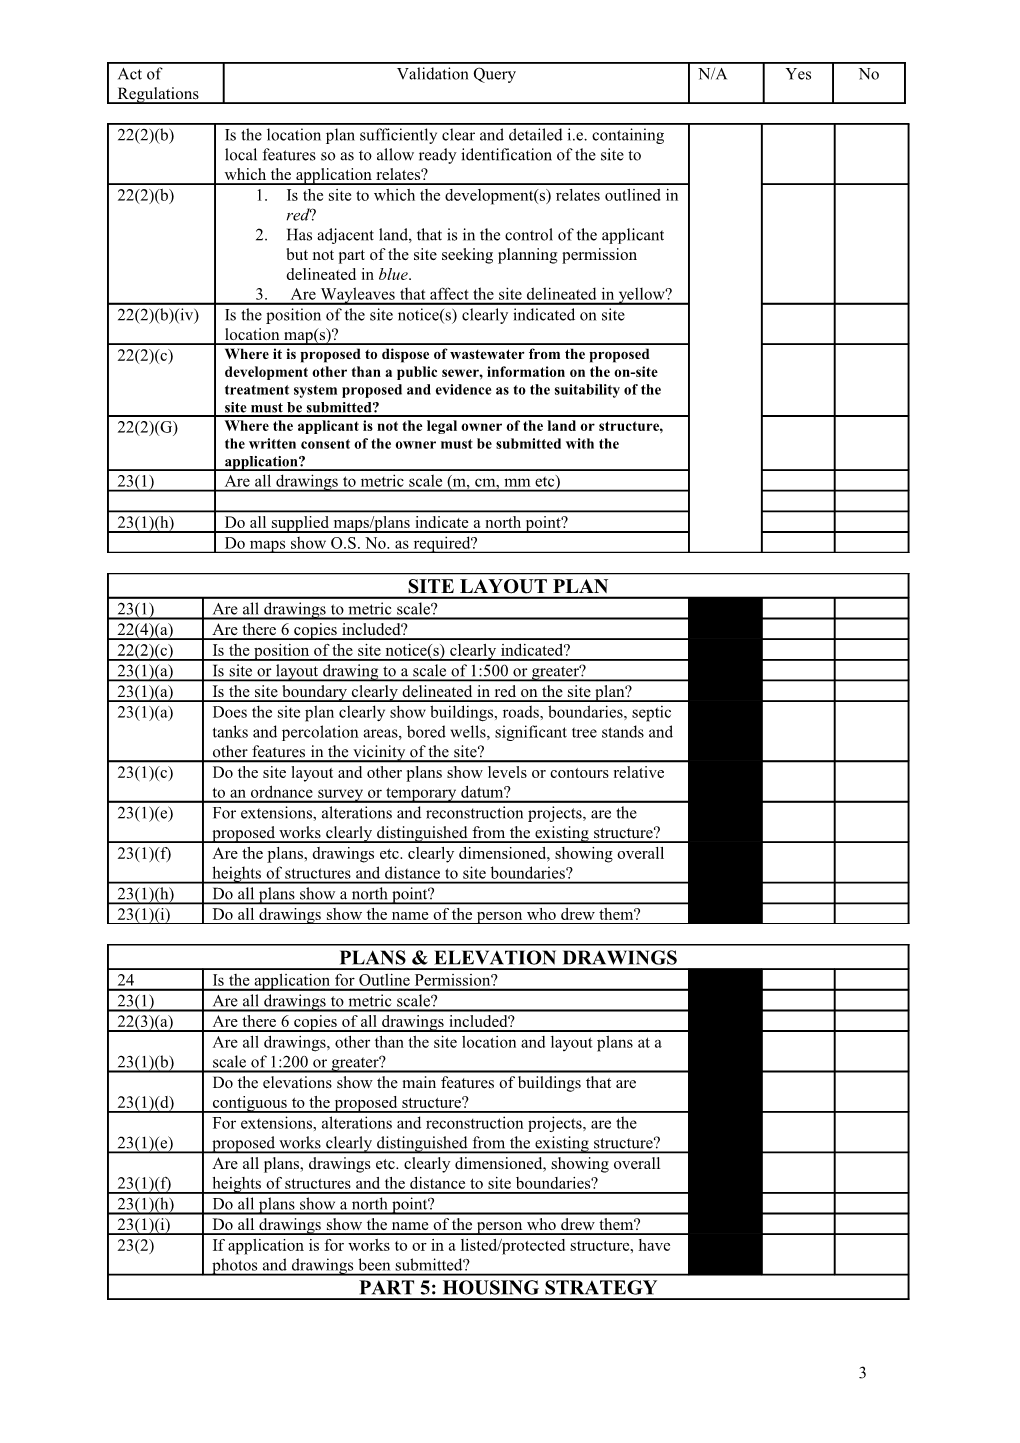 N.B. This Checklist Was Designed As an Aid to Submitting Complete and Accurate Planning